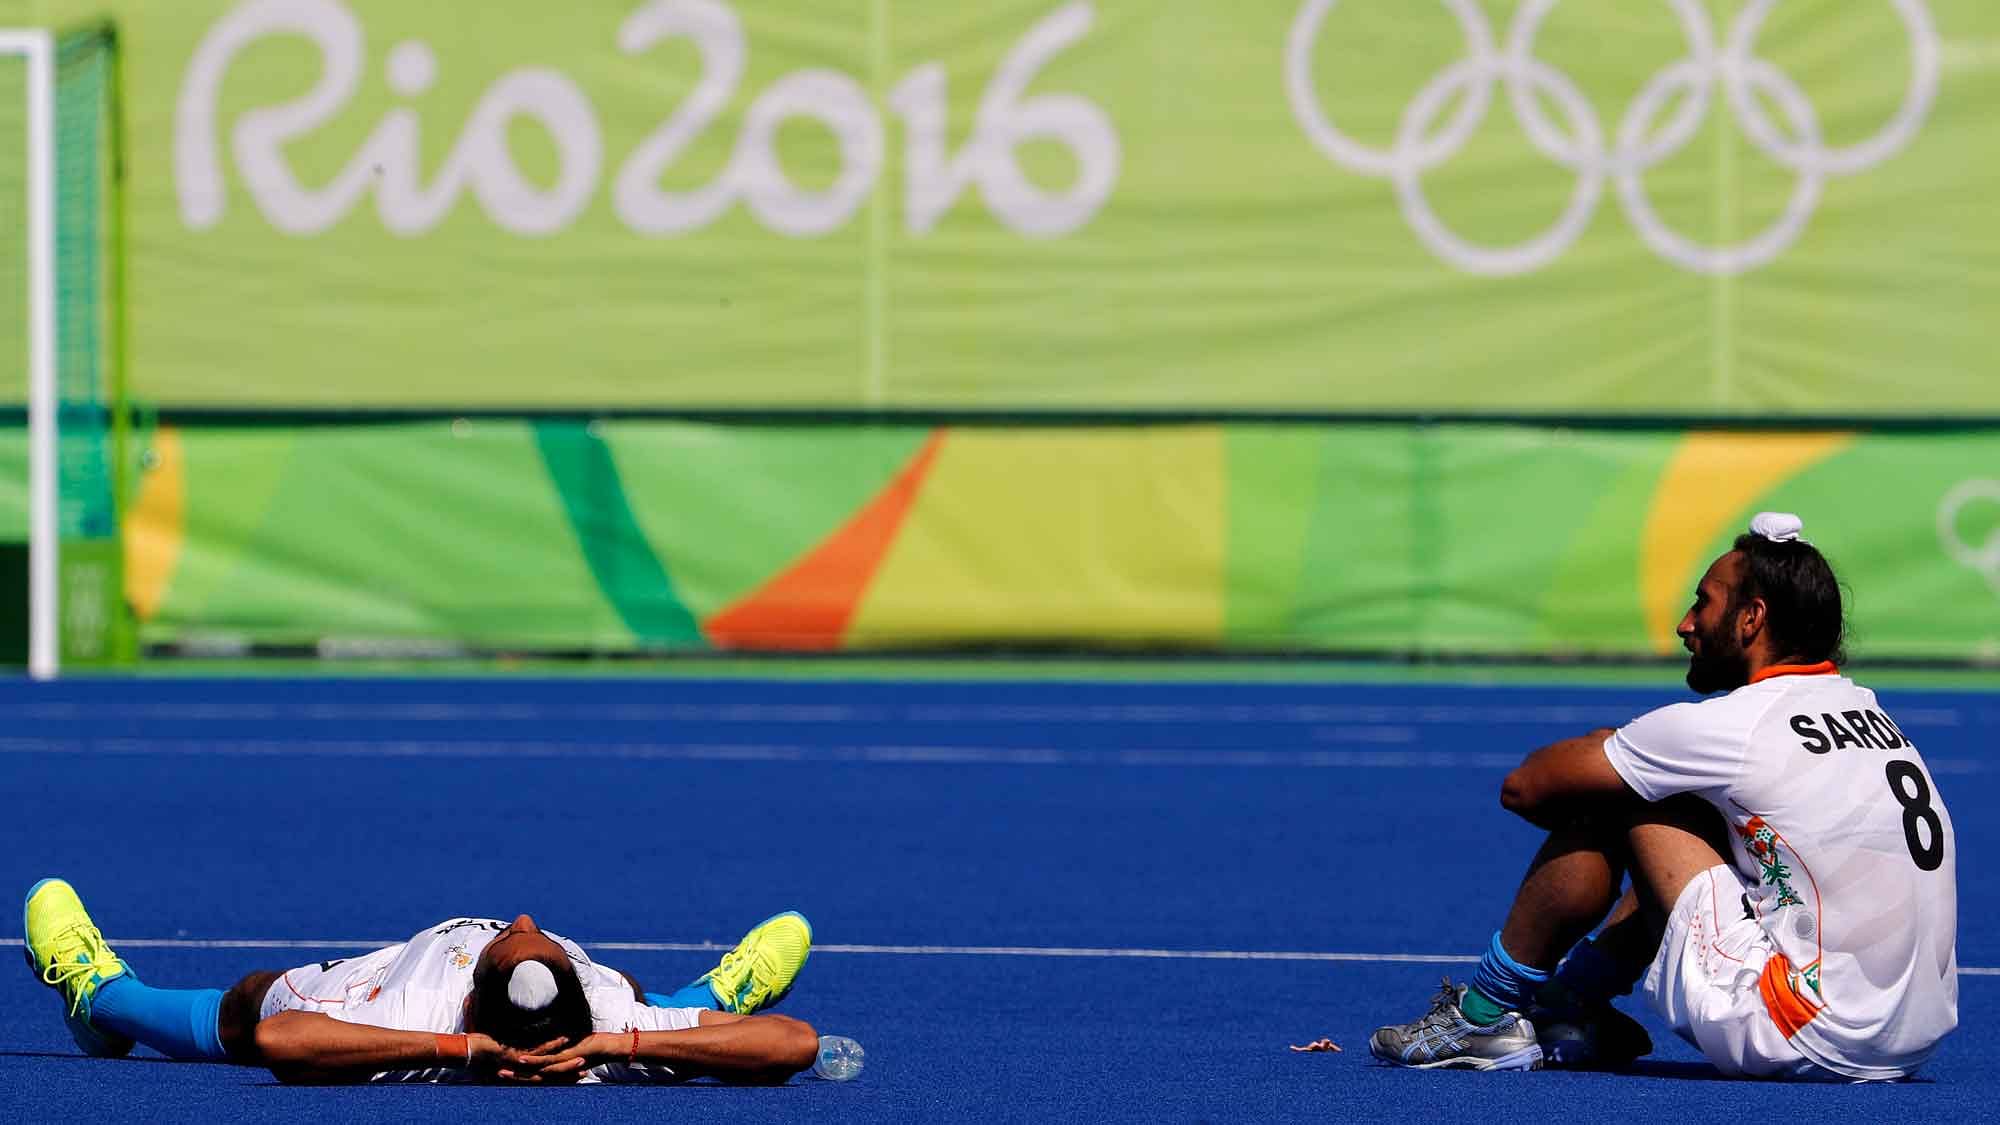 The Indian Men’s Hockey team got knocked out of the Rio Olympics in the quarterfinals. (Photo: AP)